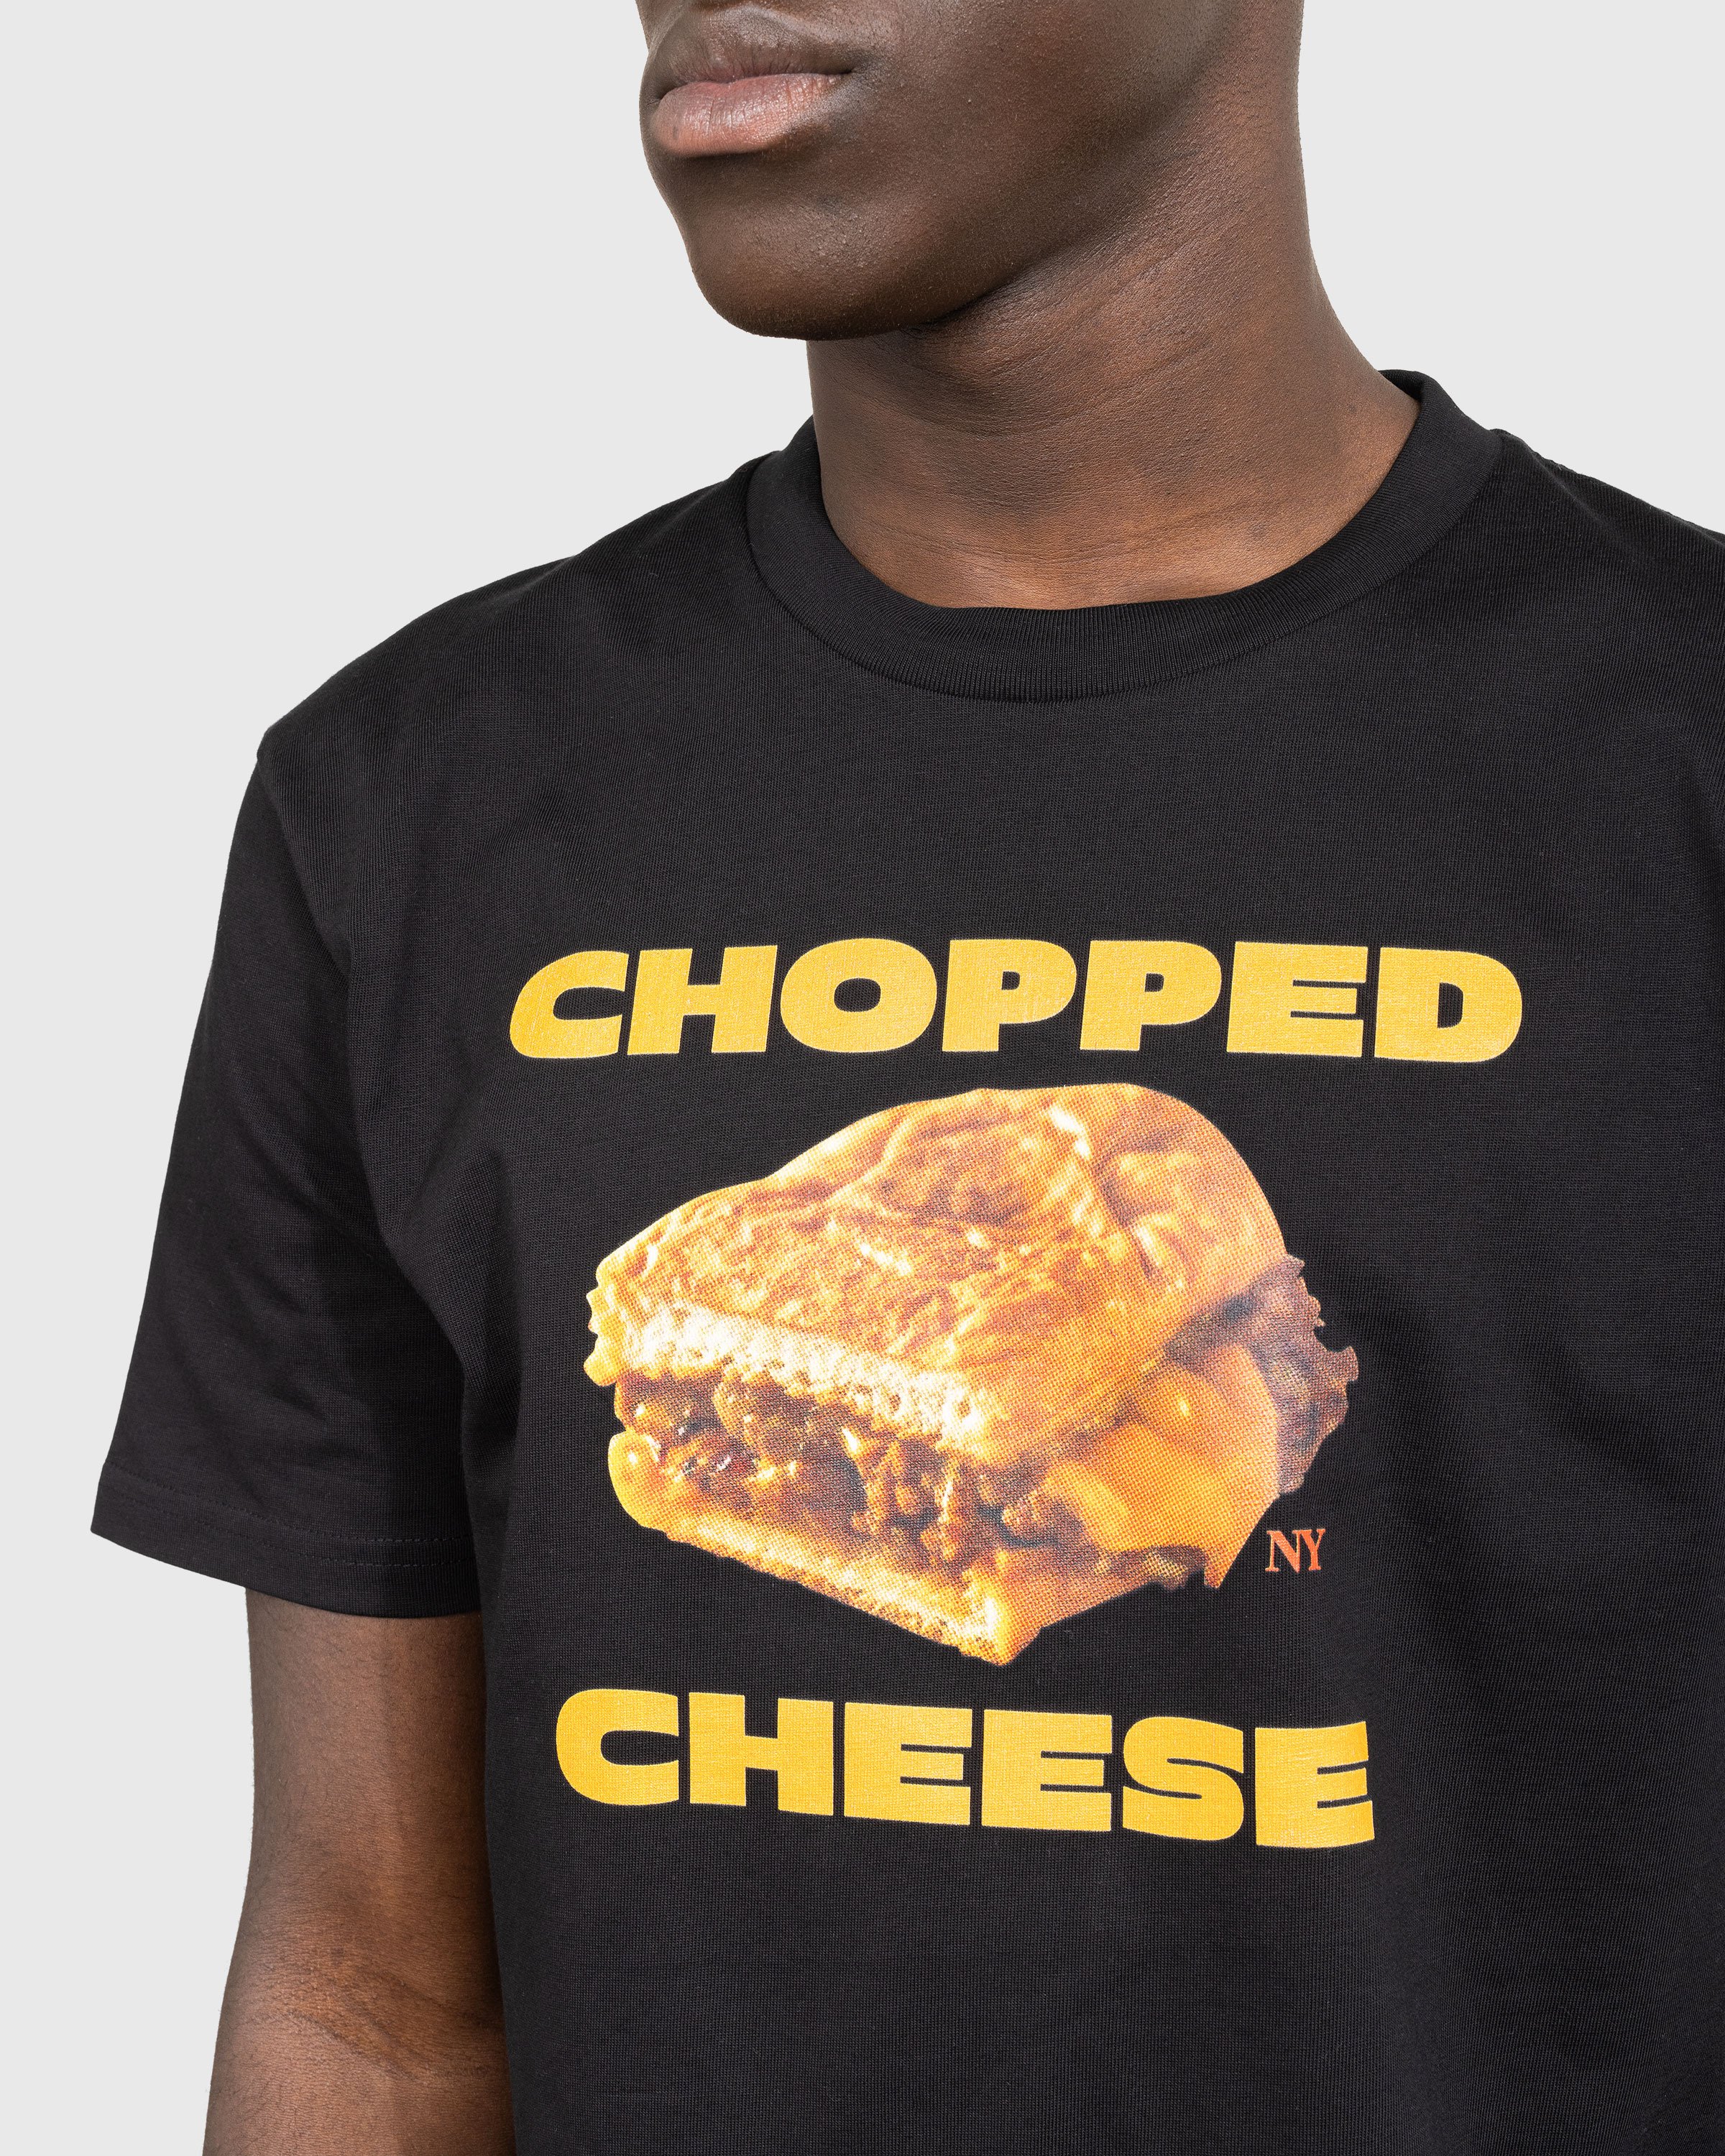 At The Moment x Highsnobiety - Chopped Cheese T-Shirt - Clothing - Black - Image 5